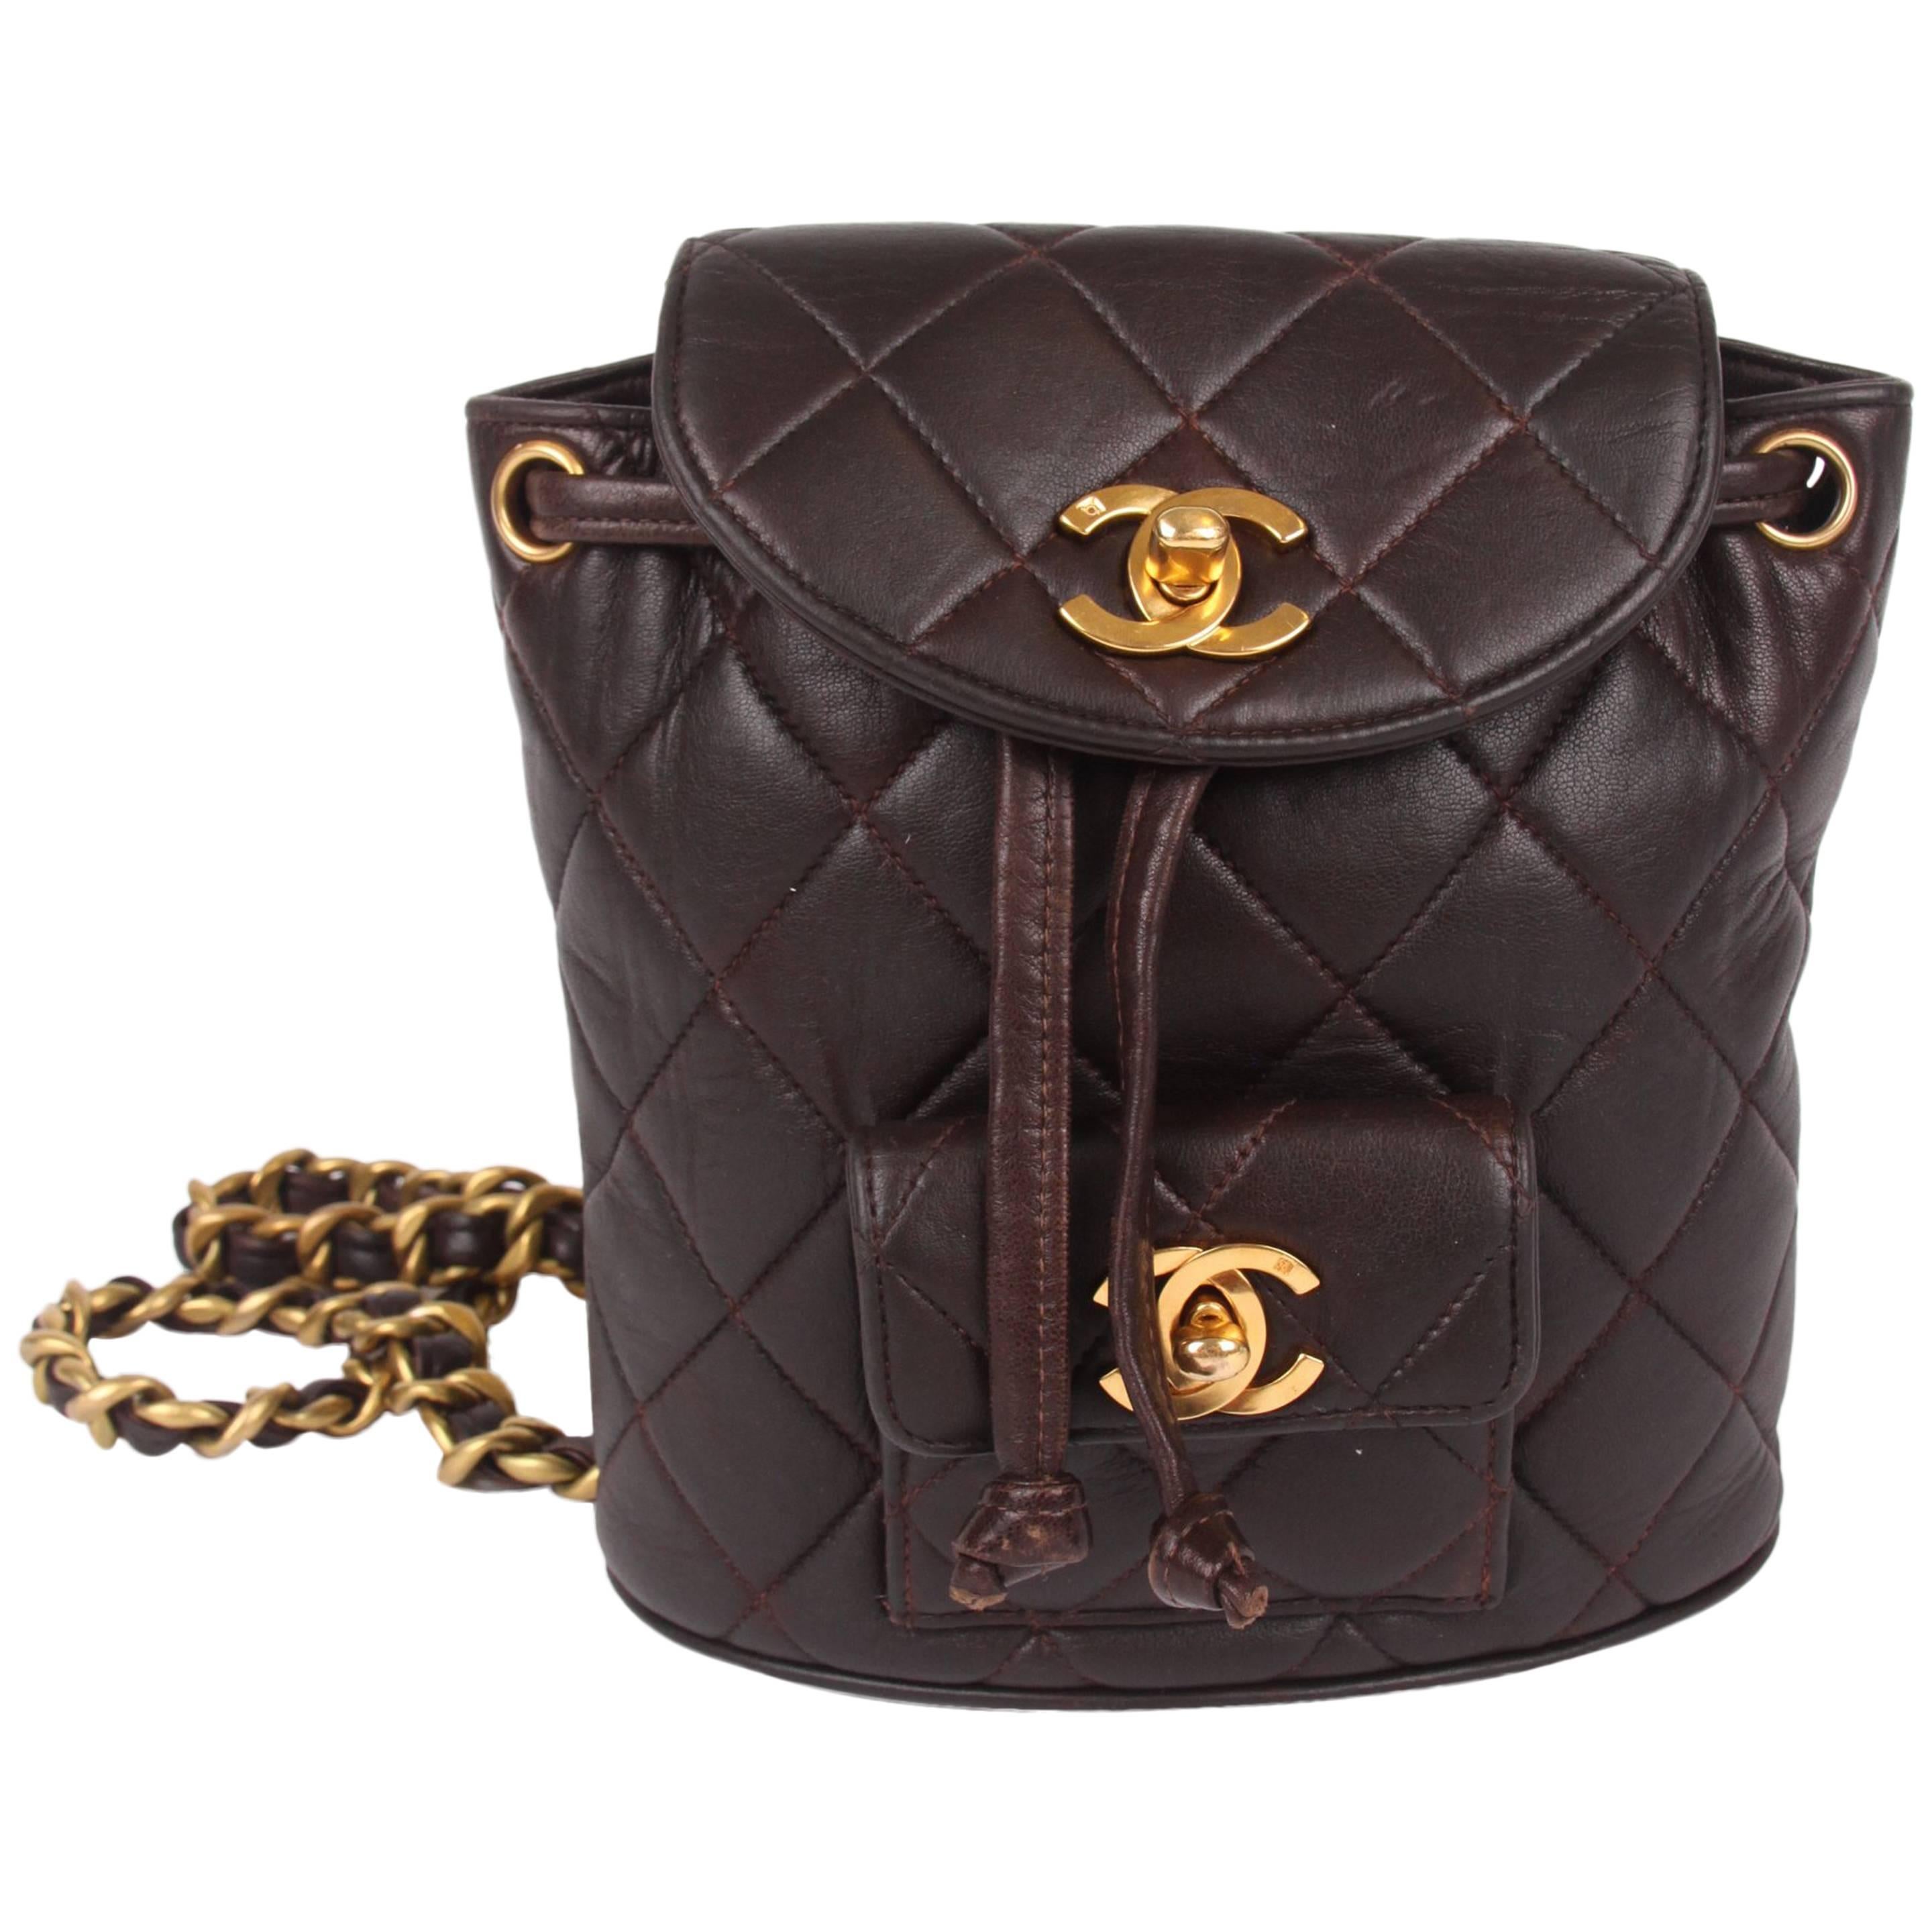 Chanel Quilted Mini Backpack - dark brown/gold 